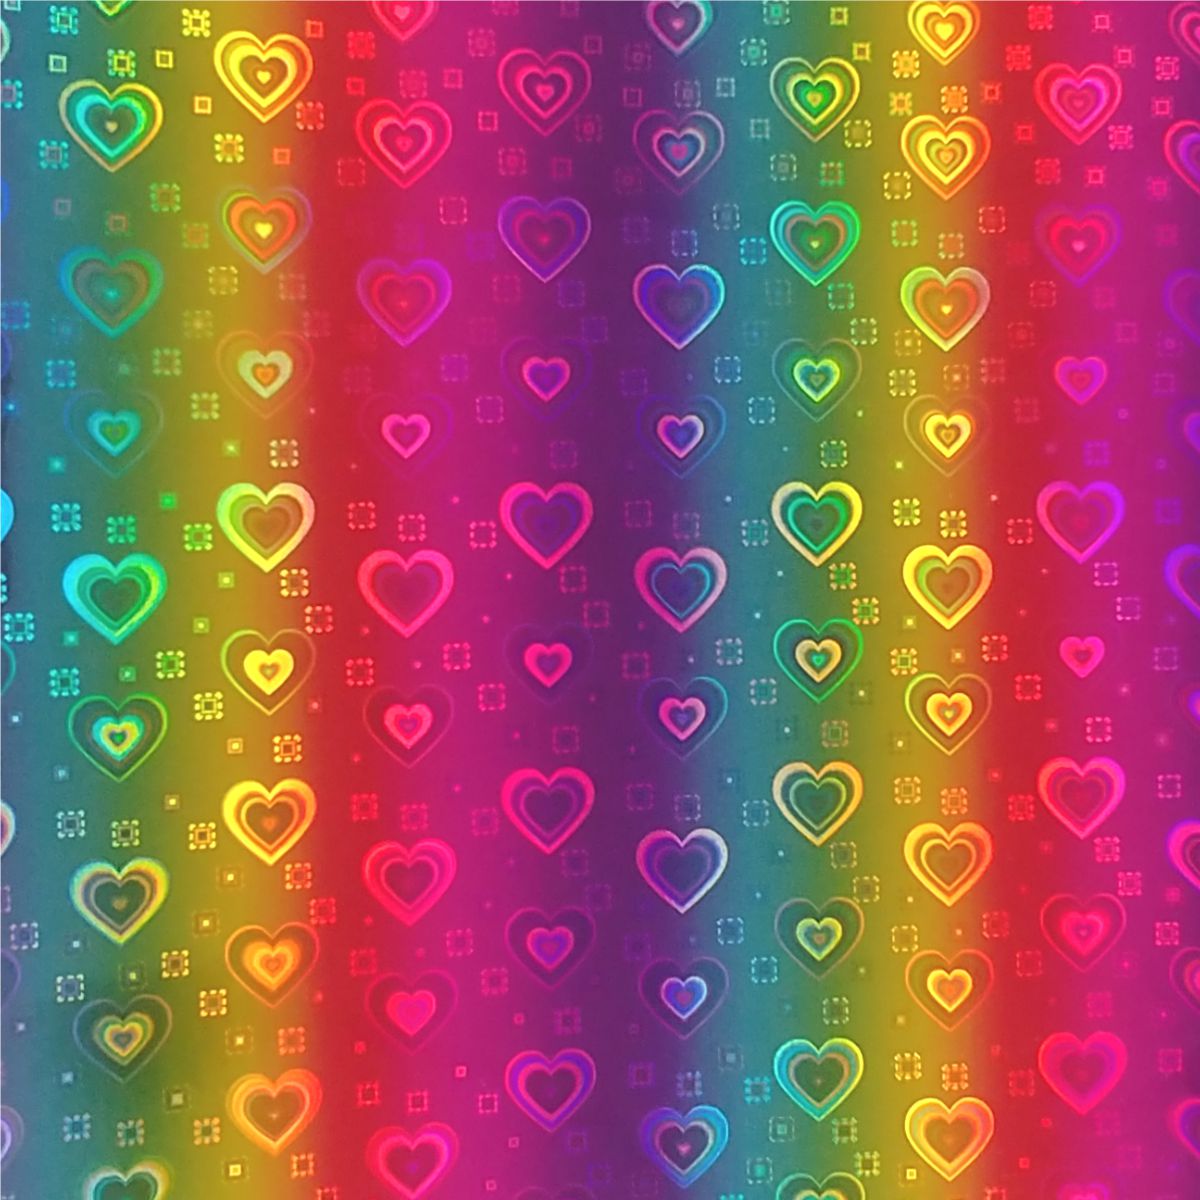 Watercolor Rainbow Heart Faux Leather Sheets